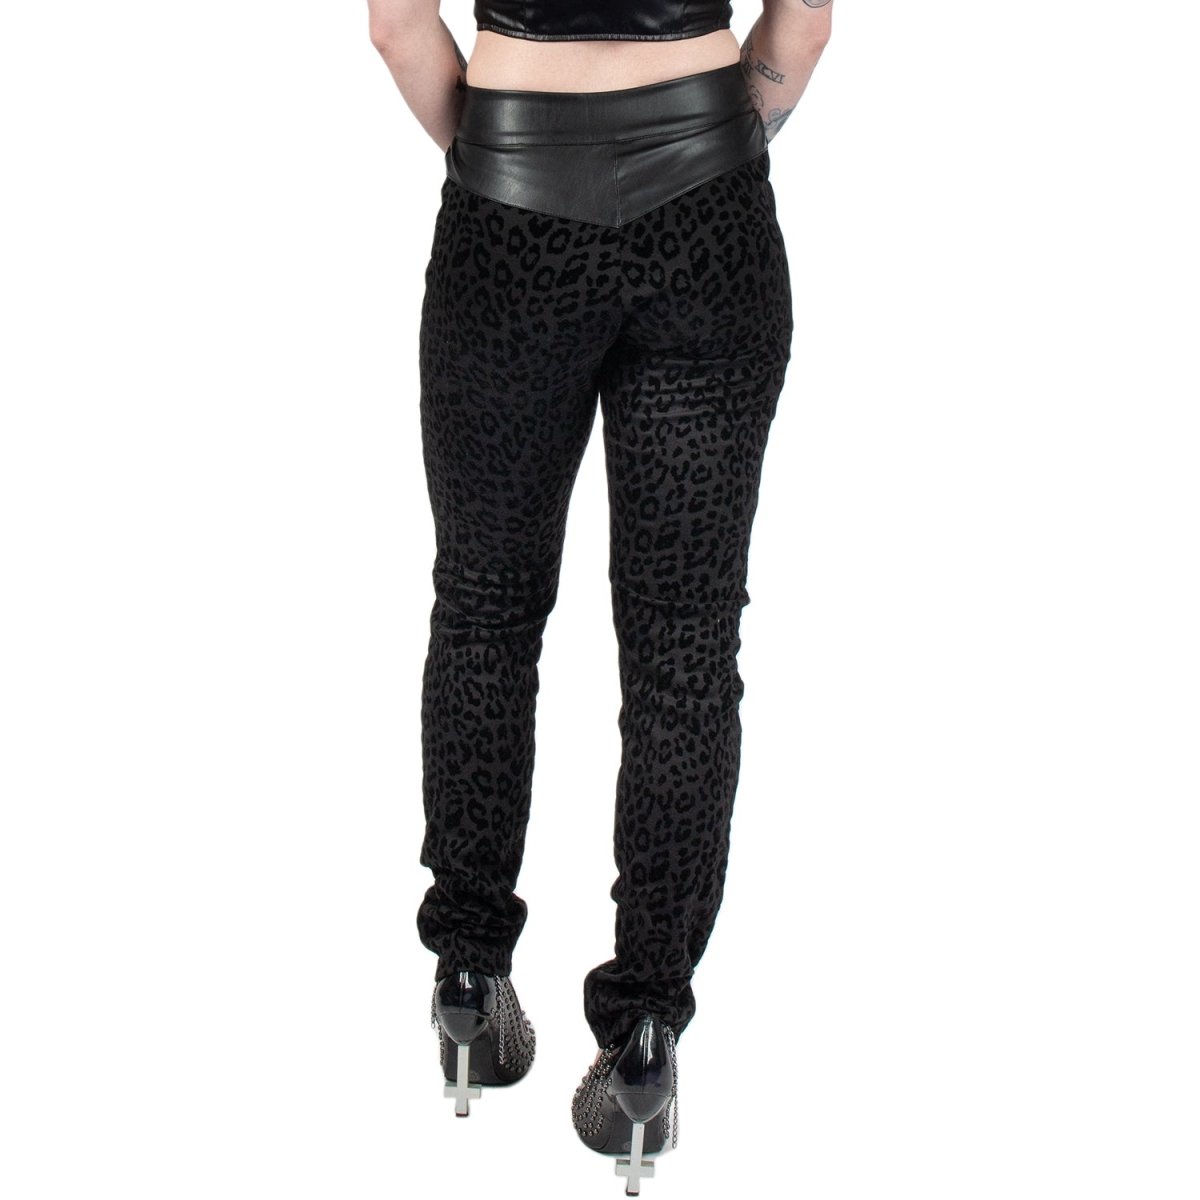 Too Fast | Switchblade Stiletto | Black Leopard High Waisted Rebel Pants